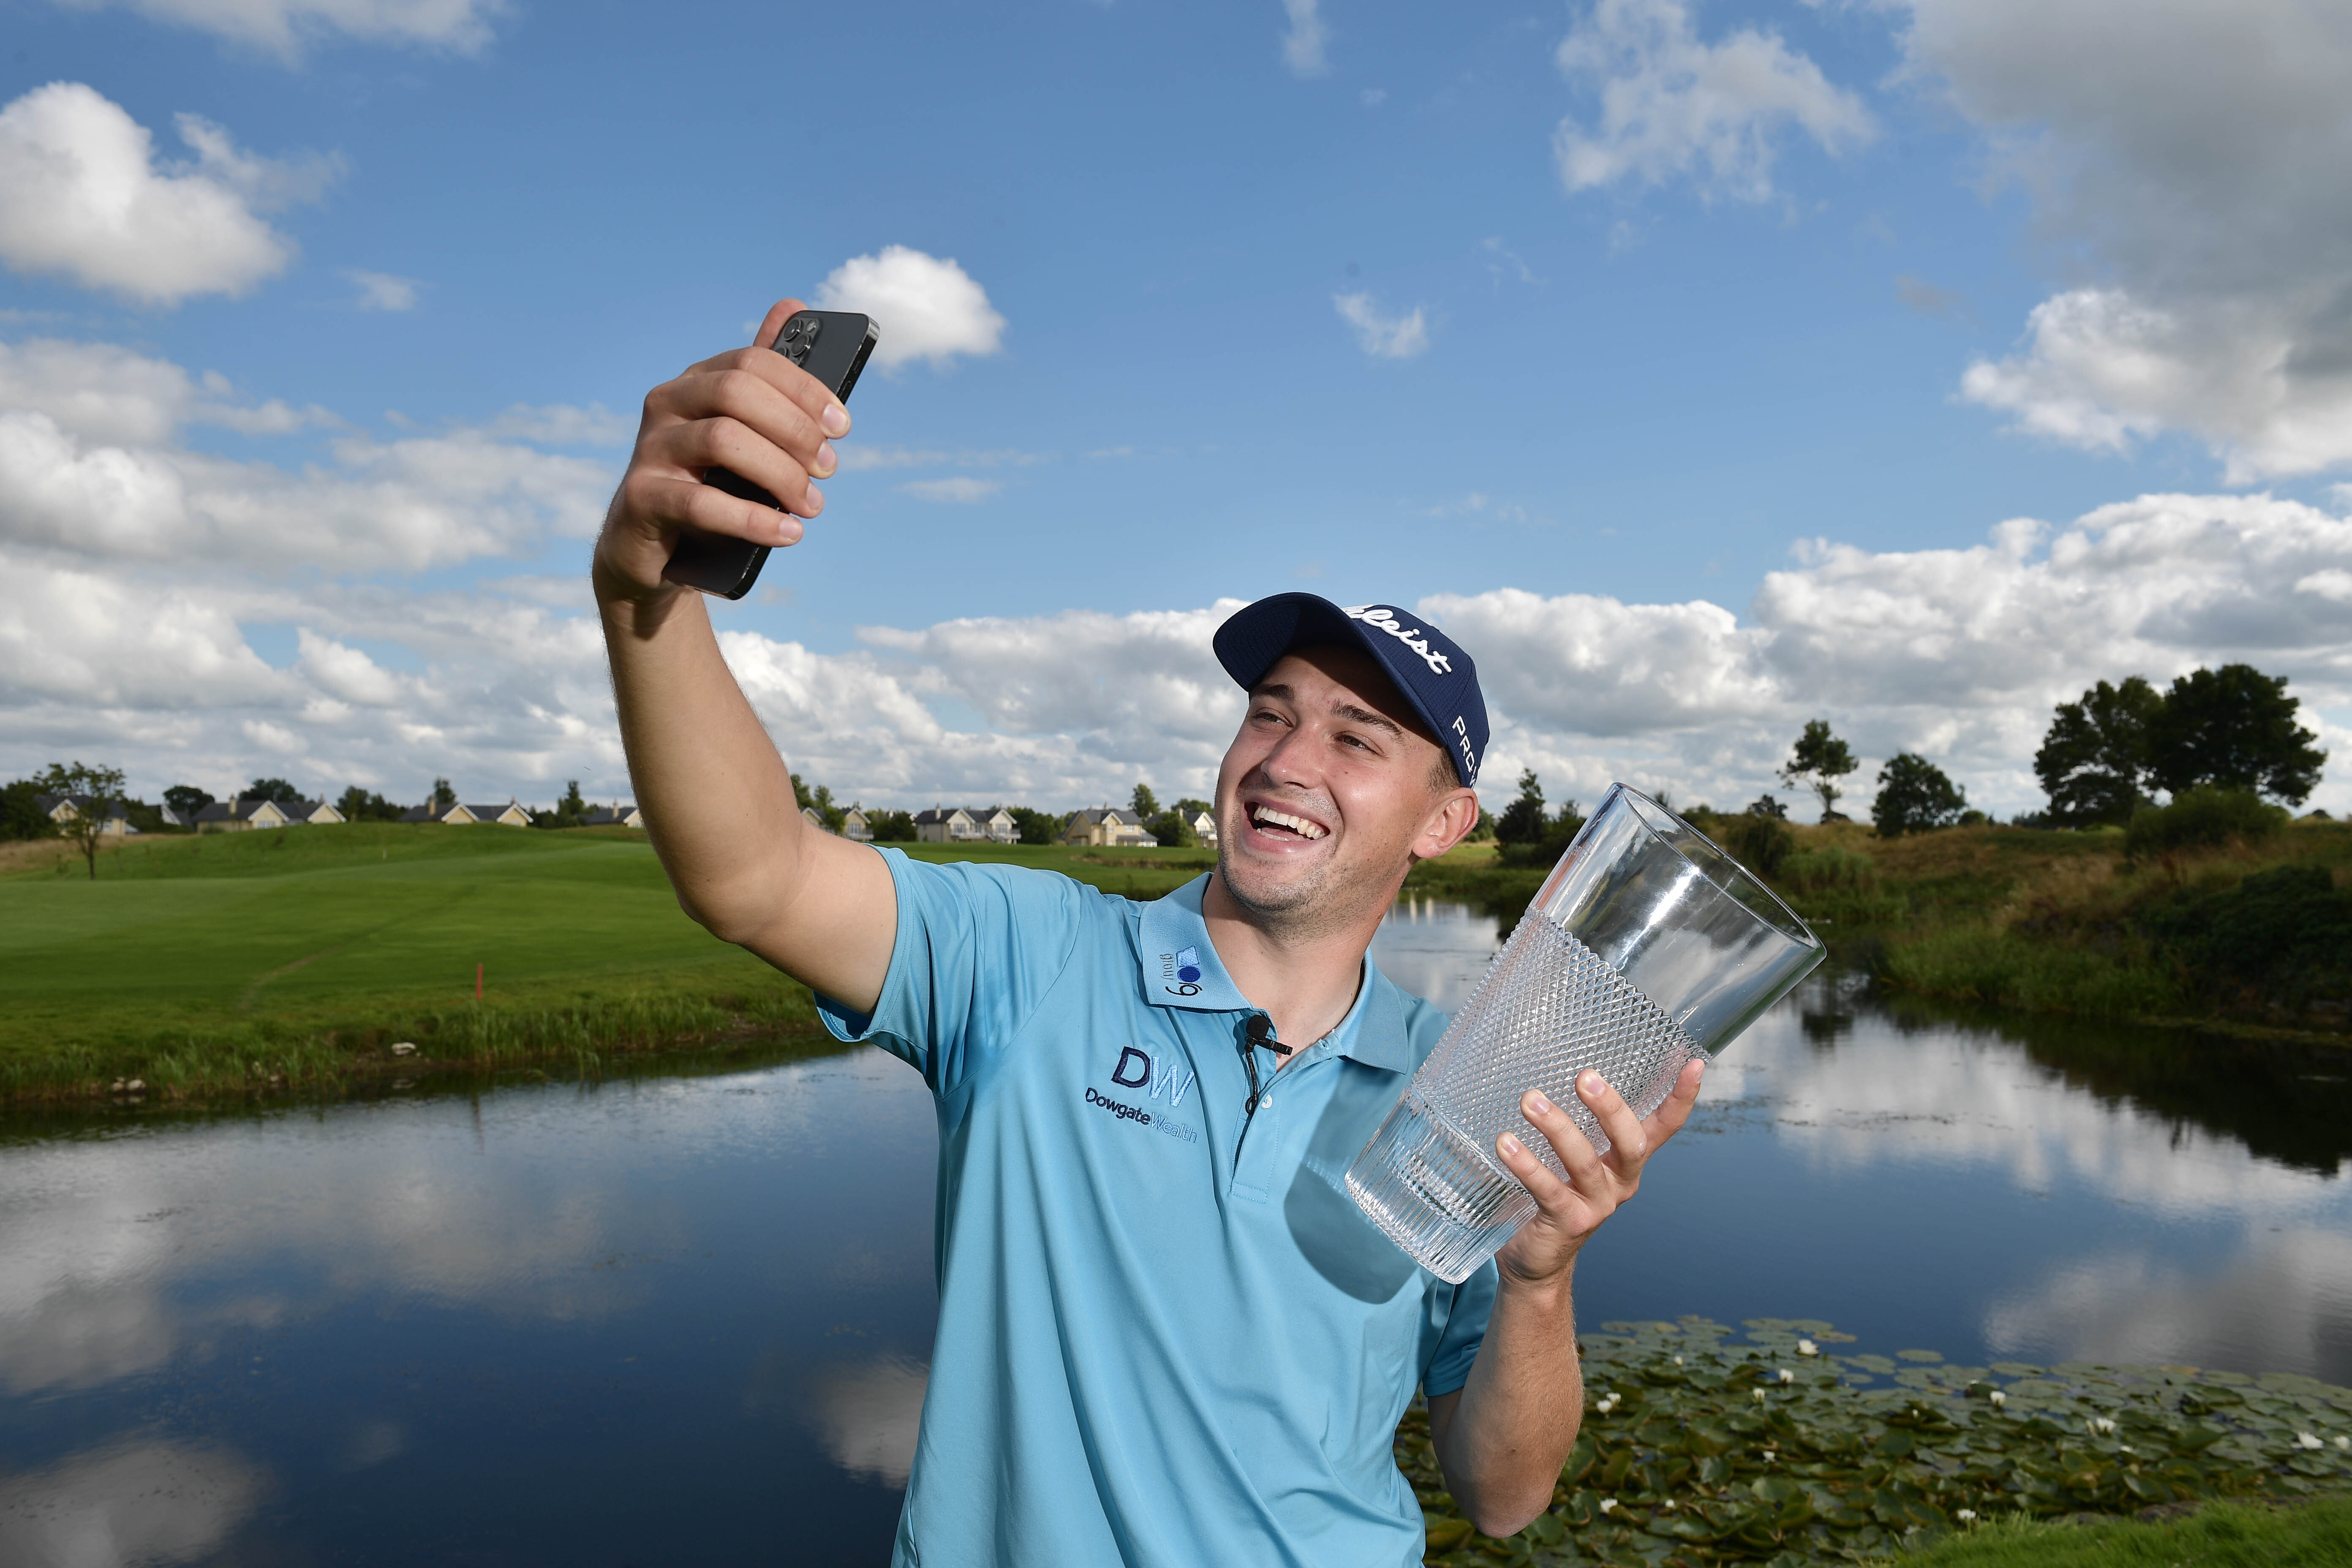 Pro golfer takes a selfie with his trophy